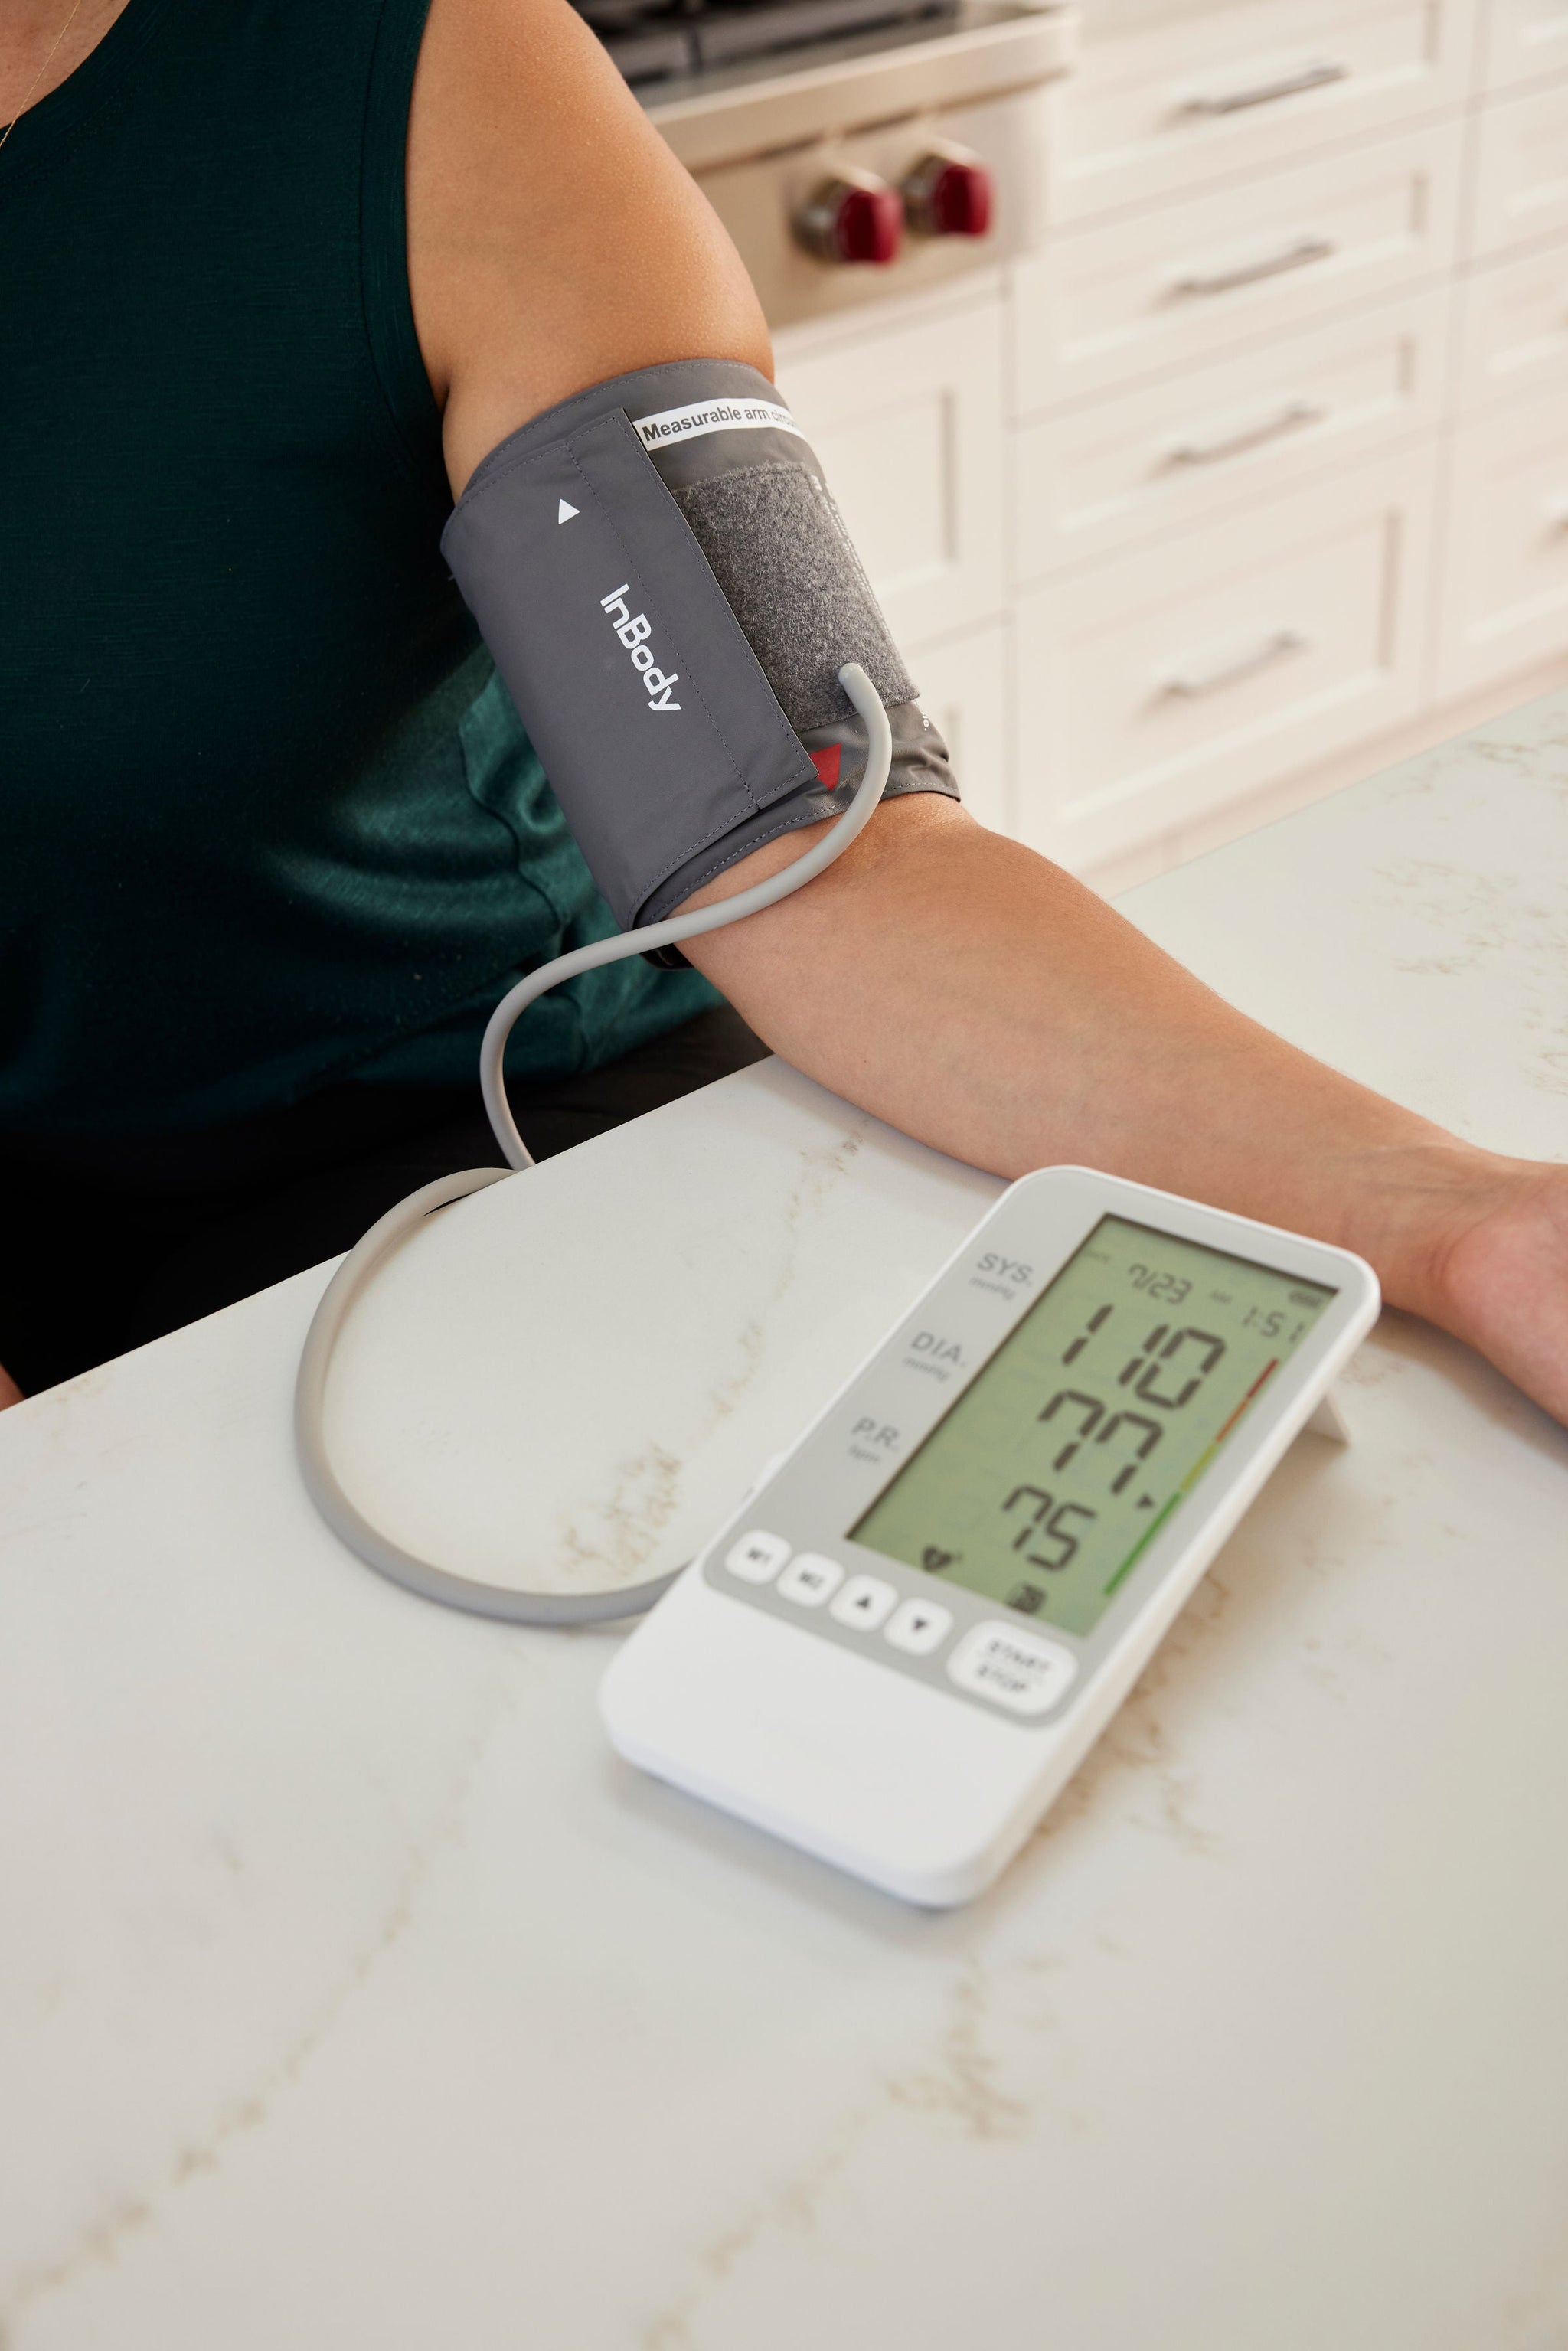 InBody at-Home Automatic Blood Pressure Monitor BP170 - High Blood Pressure  Monitor with One-Touch Cuff, for Home and Professional Use, Large Digital